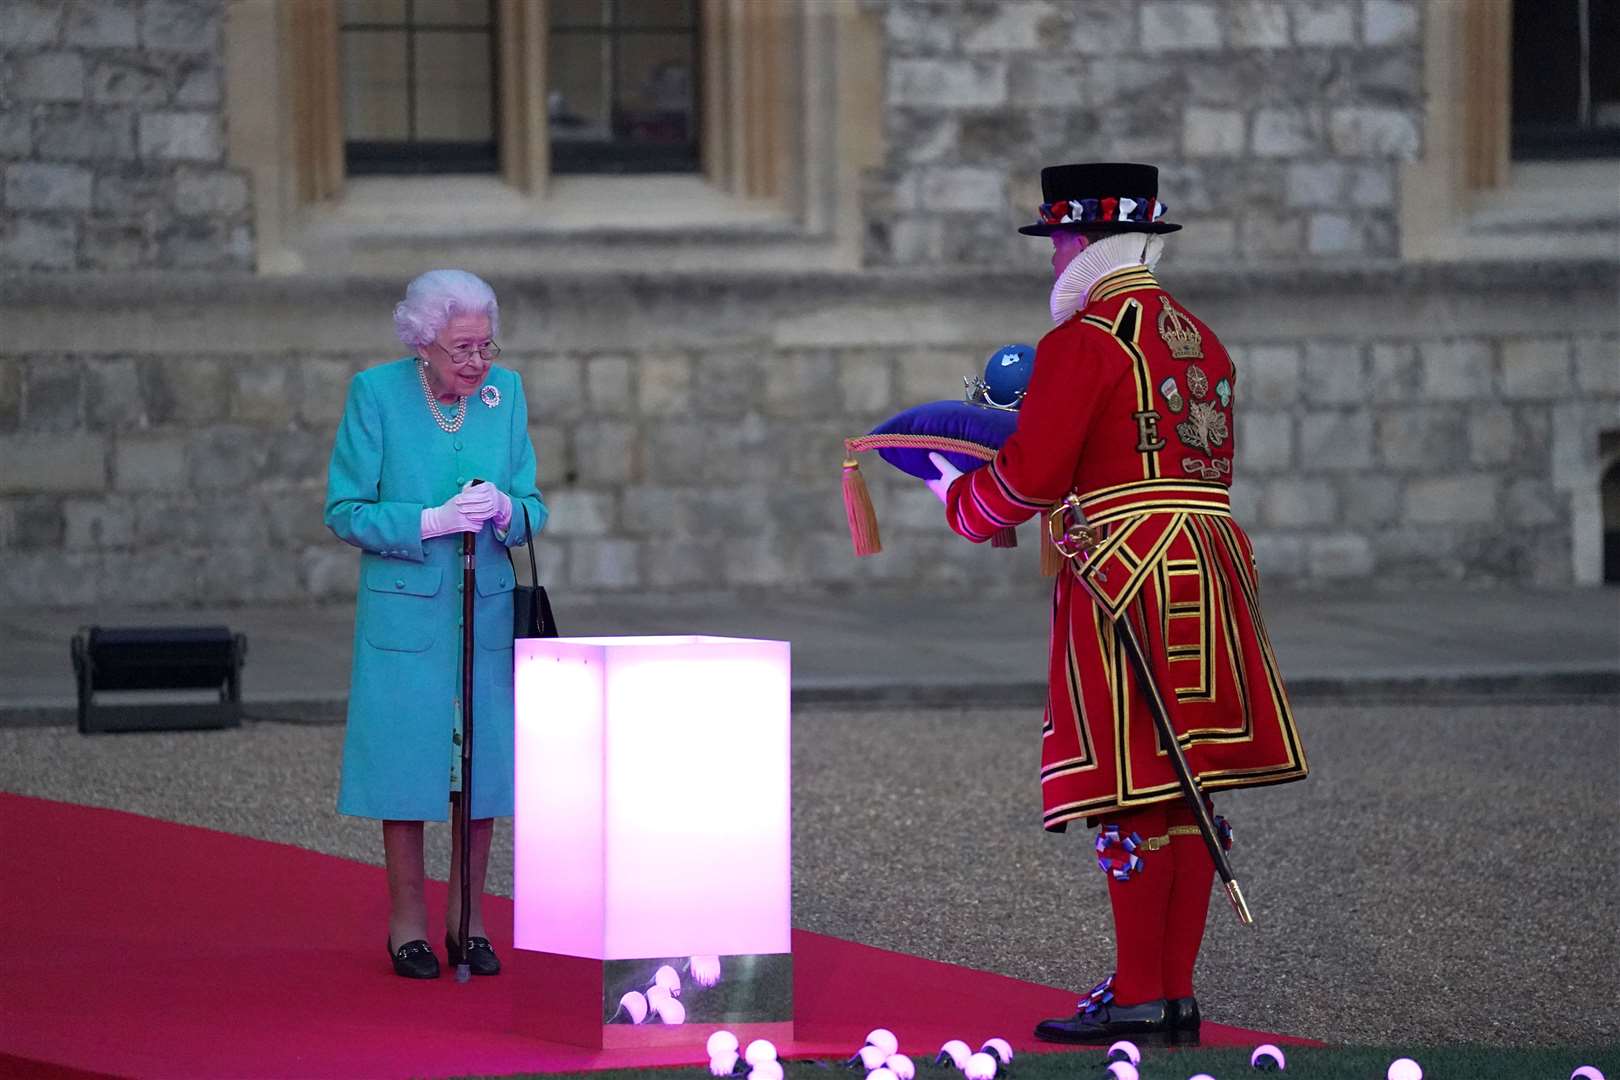 The Queen symbolically leading the lighting of the principal Jubilee beacon at Windsor Castle (Steve Parsons/PA)